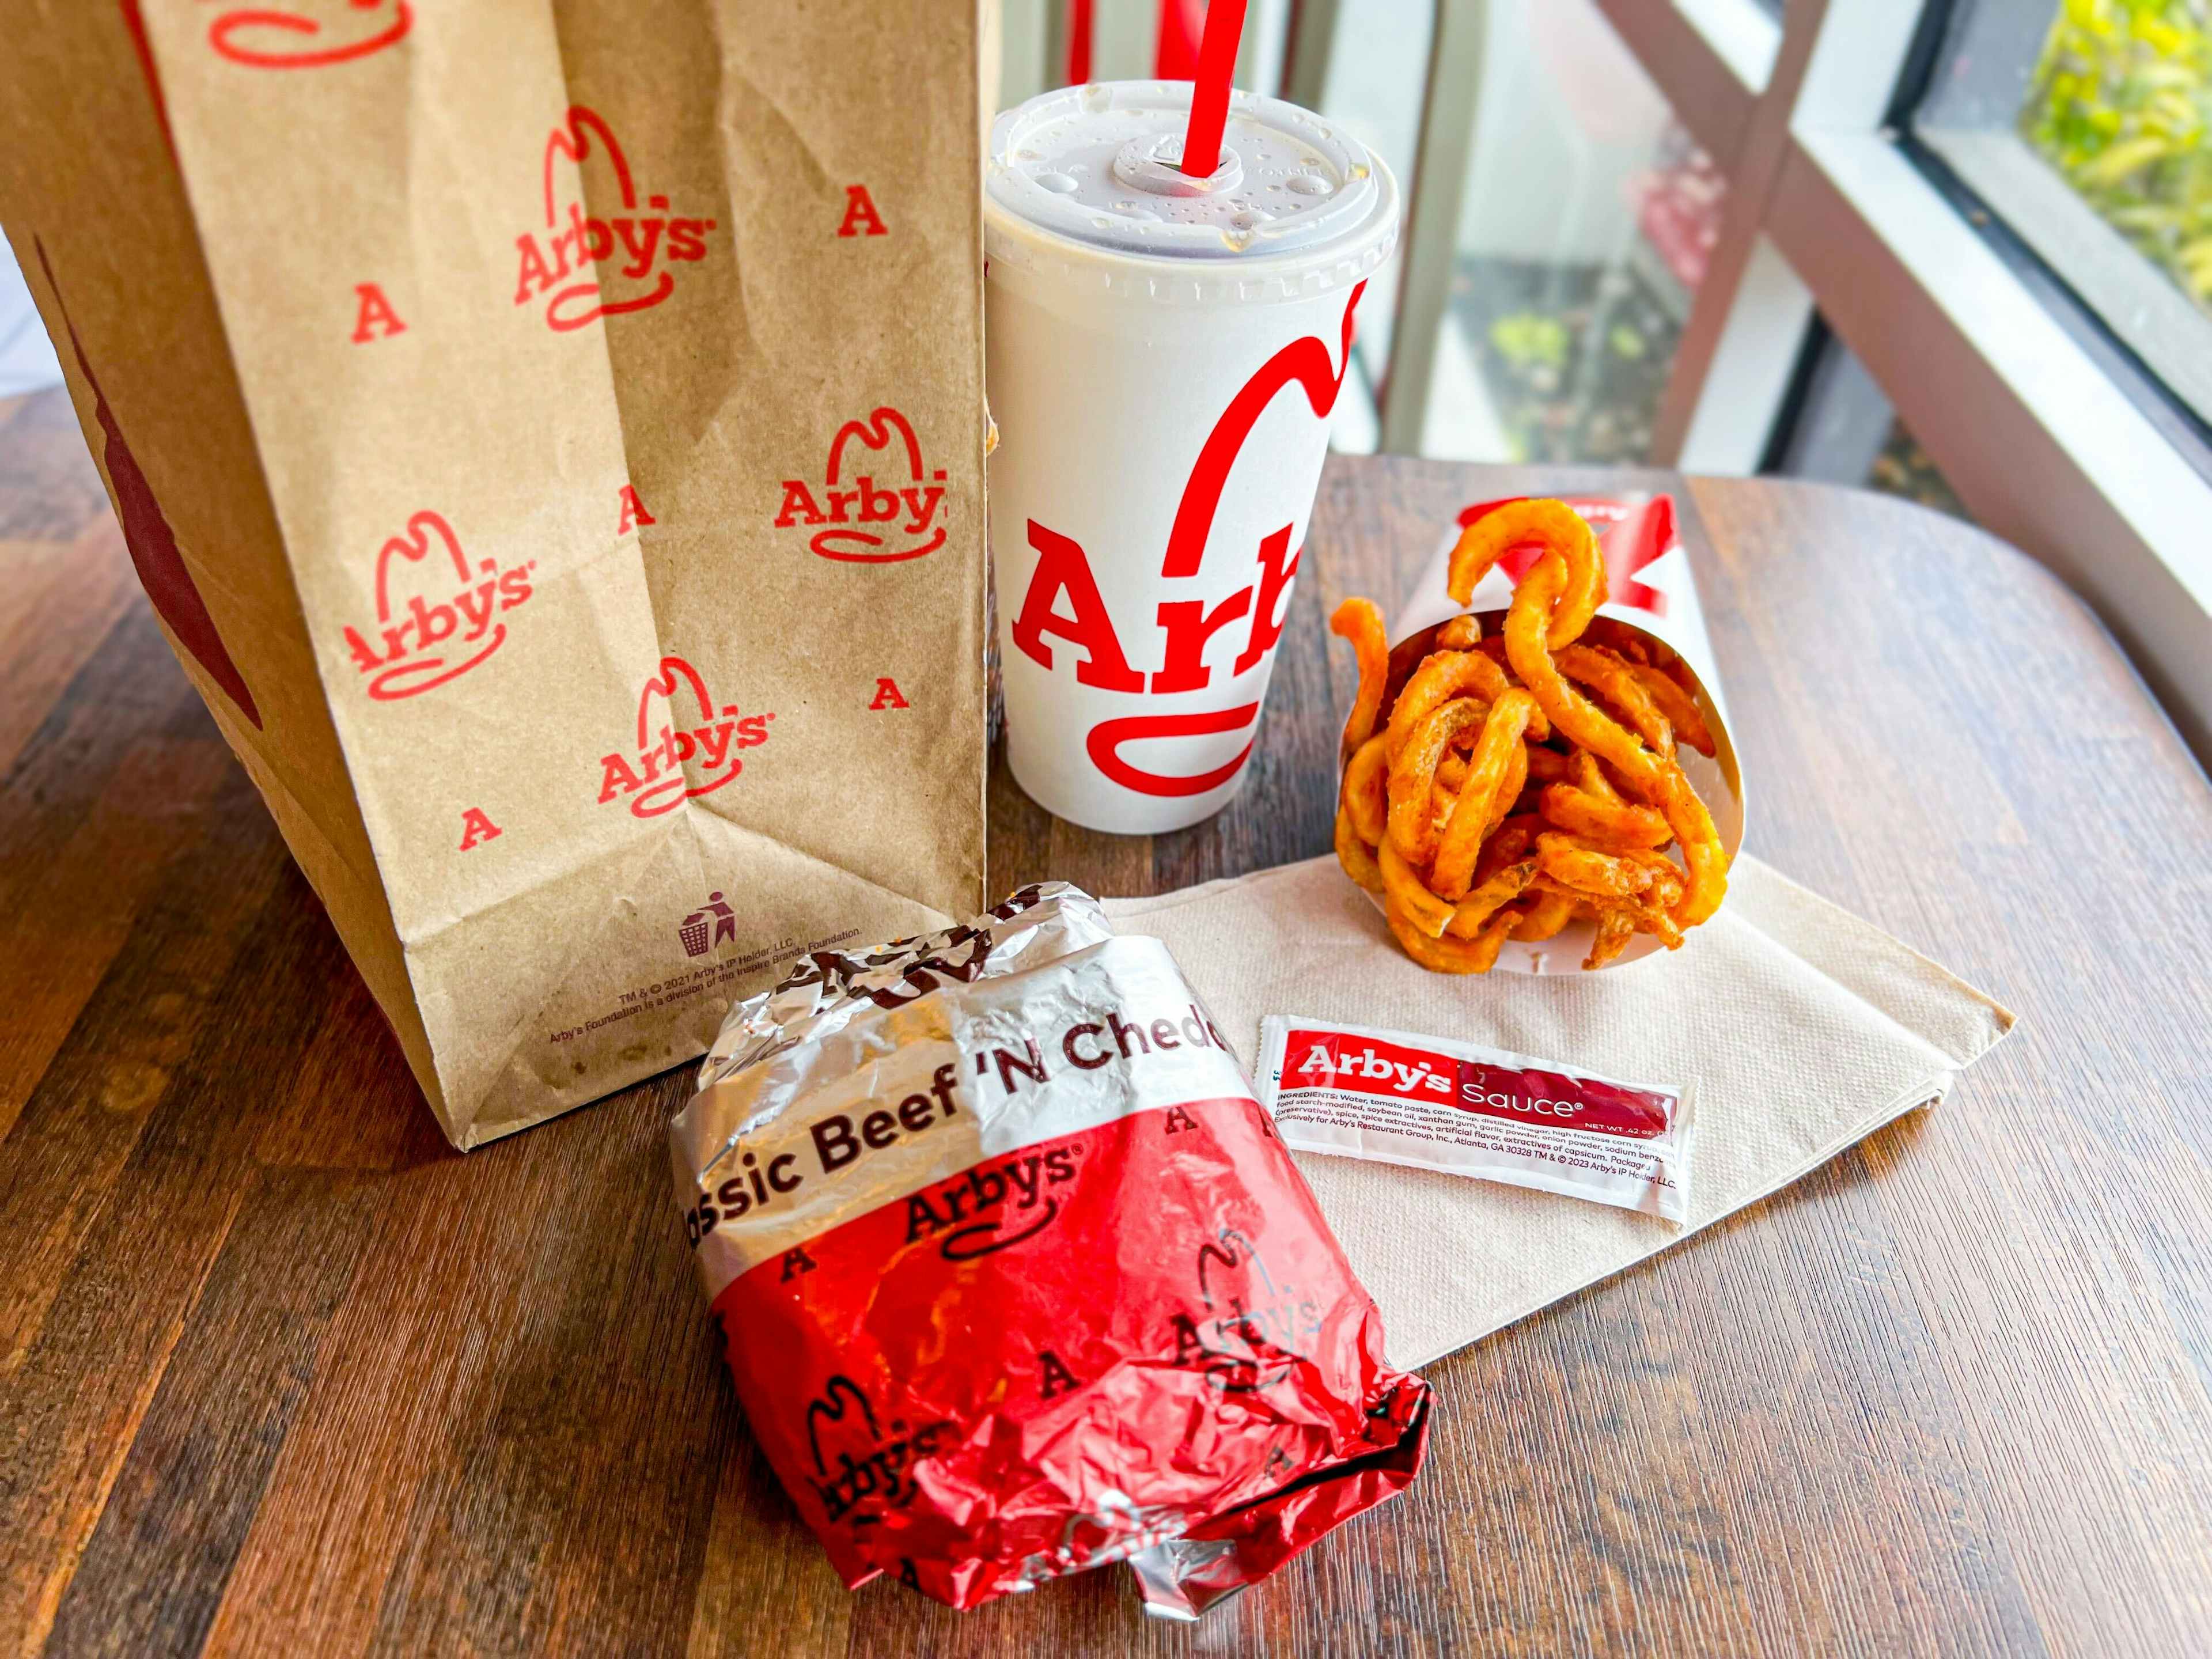 april-food-deals-arbys-free-sandwich-classic-beef-n-cheddar-meal-fries-kcl-7